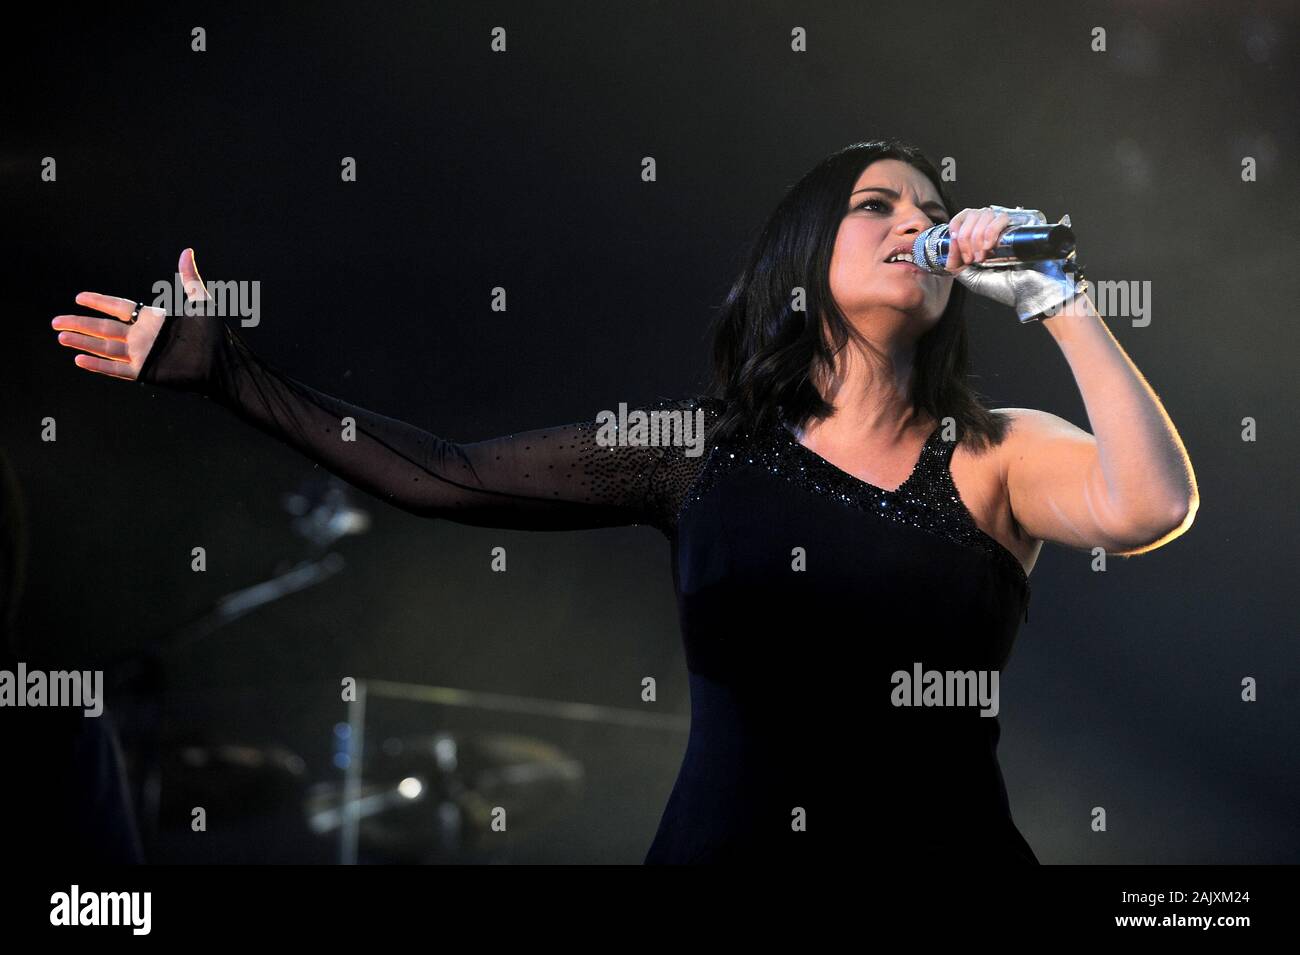 Assago Milano, Italy 12/22/2009 : Laura Pausini during the live concert at the Assago Forum Stock Photo